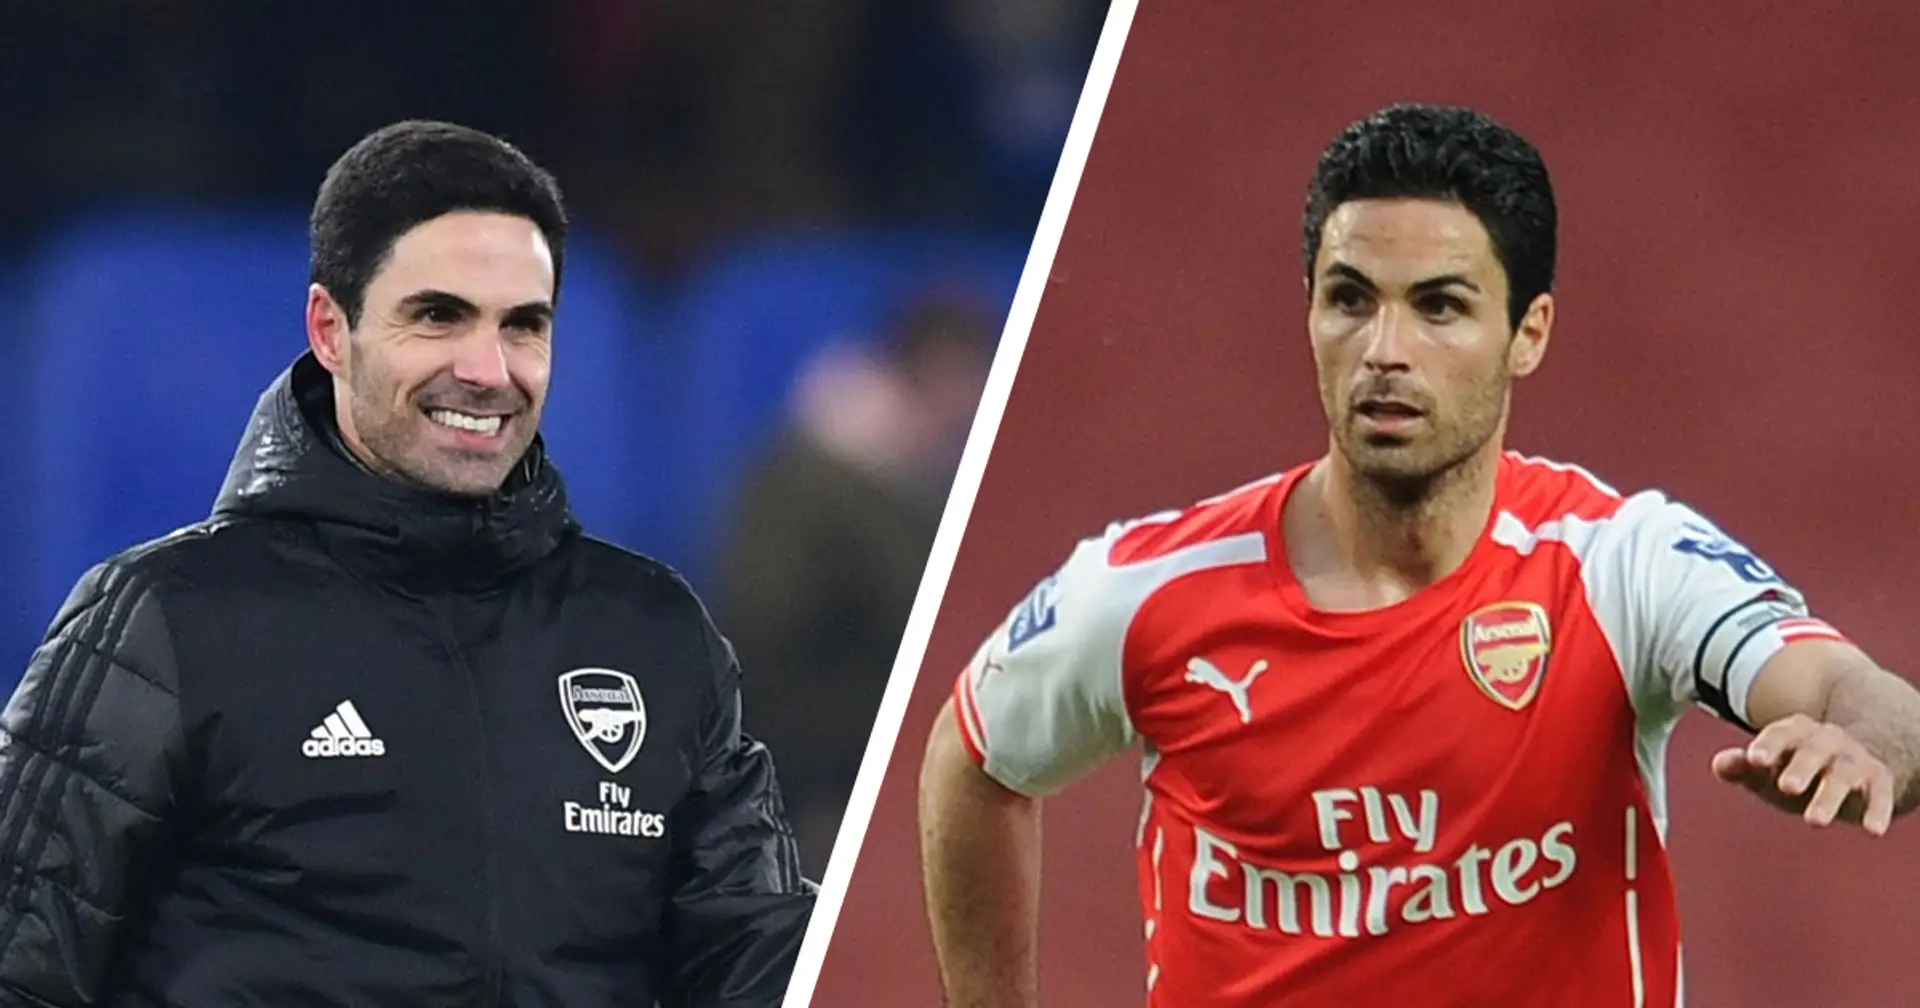 Arteta opens up on how his playing career helps him in management